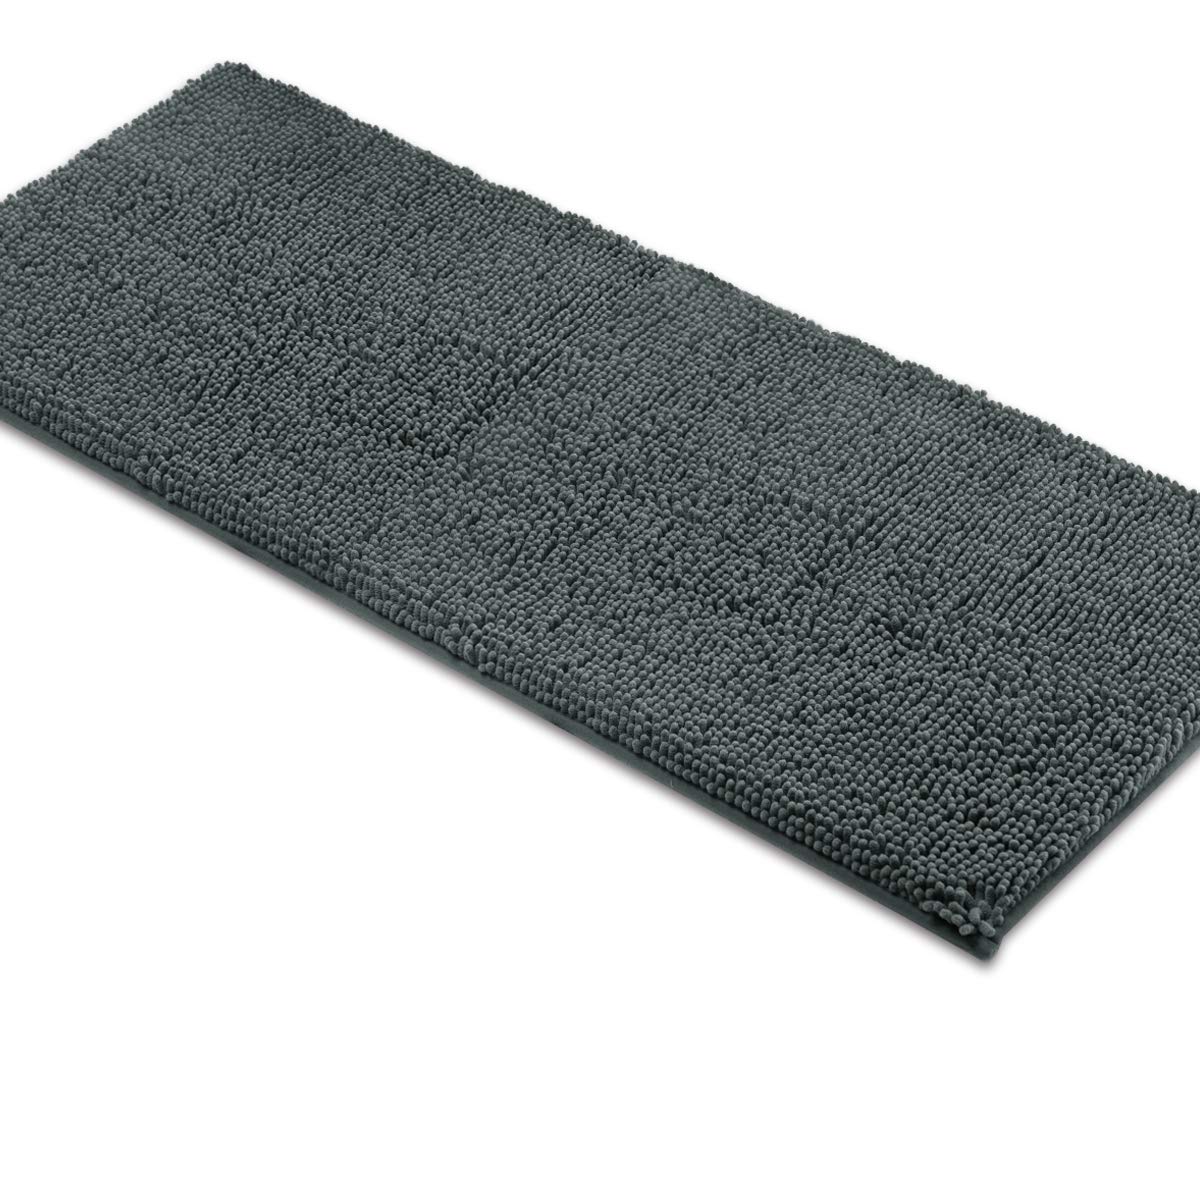 MAYSHINE Bath mat Runners for Bathroom Rugs(47X27.5inch) Long Floor mats  Extra Soft Absorbent Thickening Shaggy Microfiber Machine-Washable Perfect  for